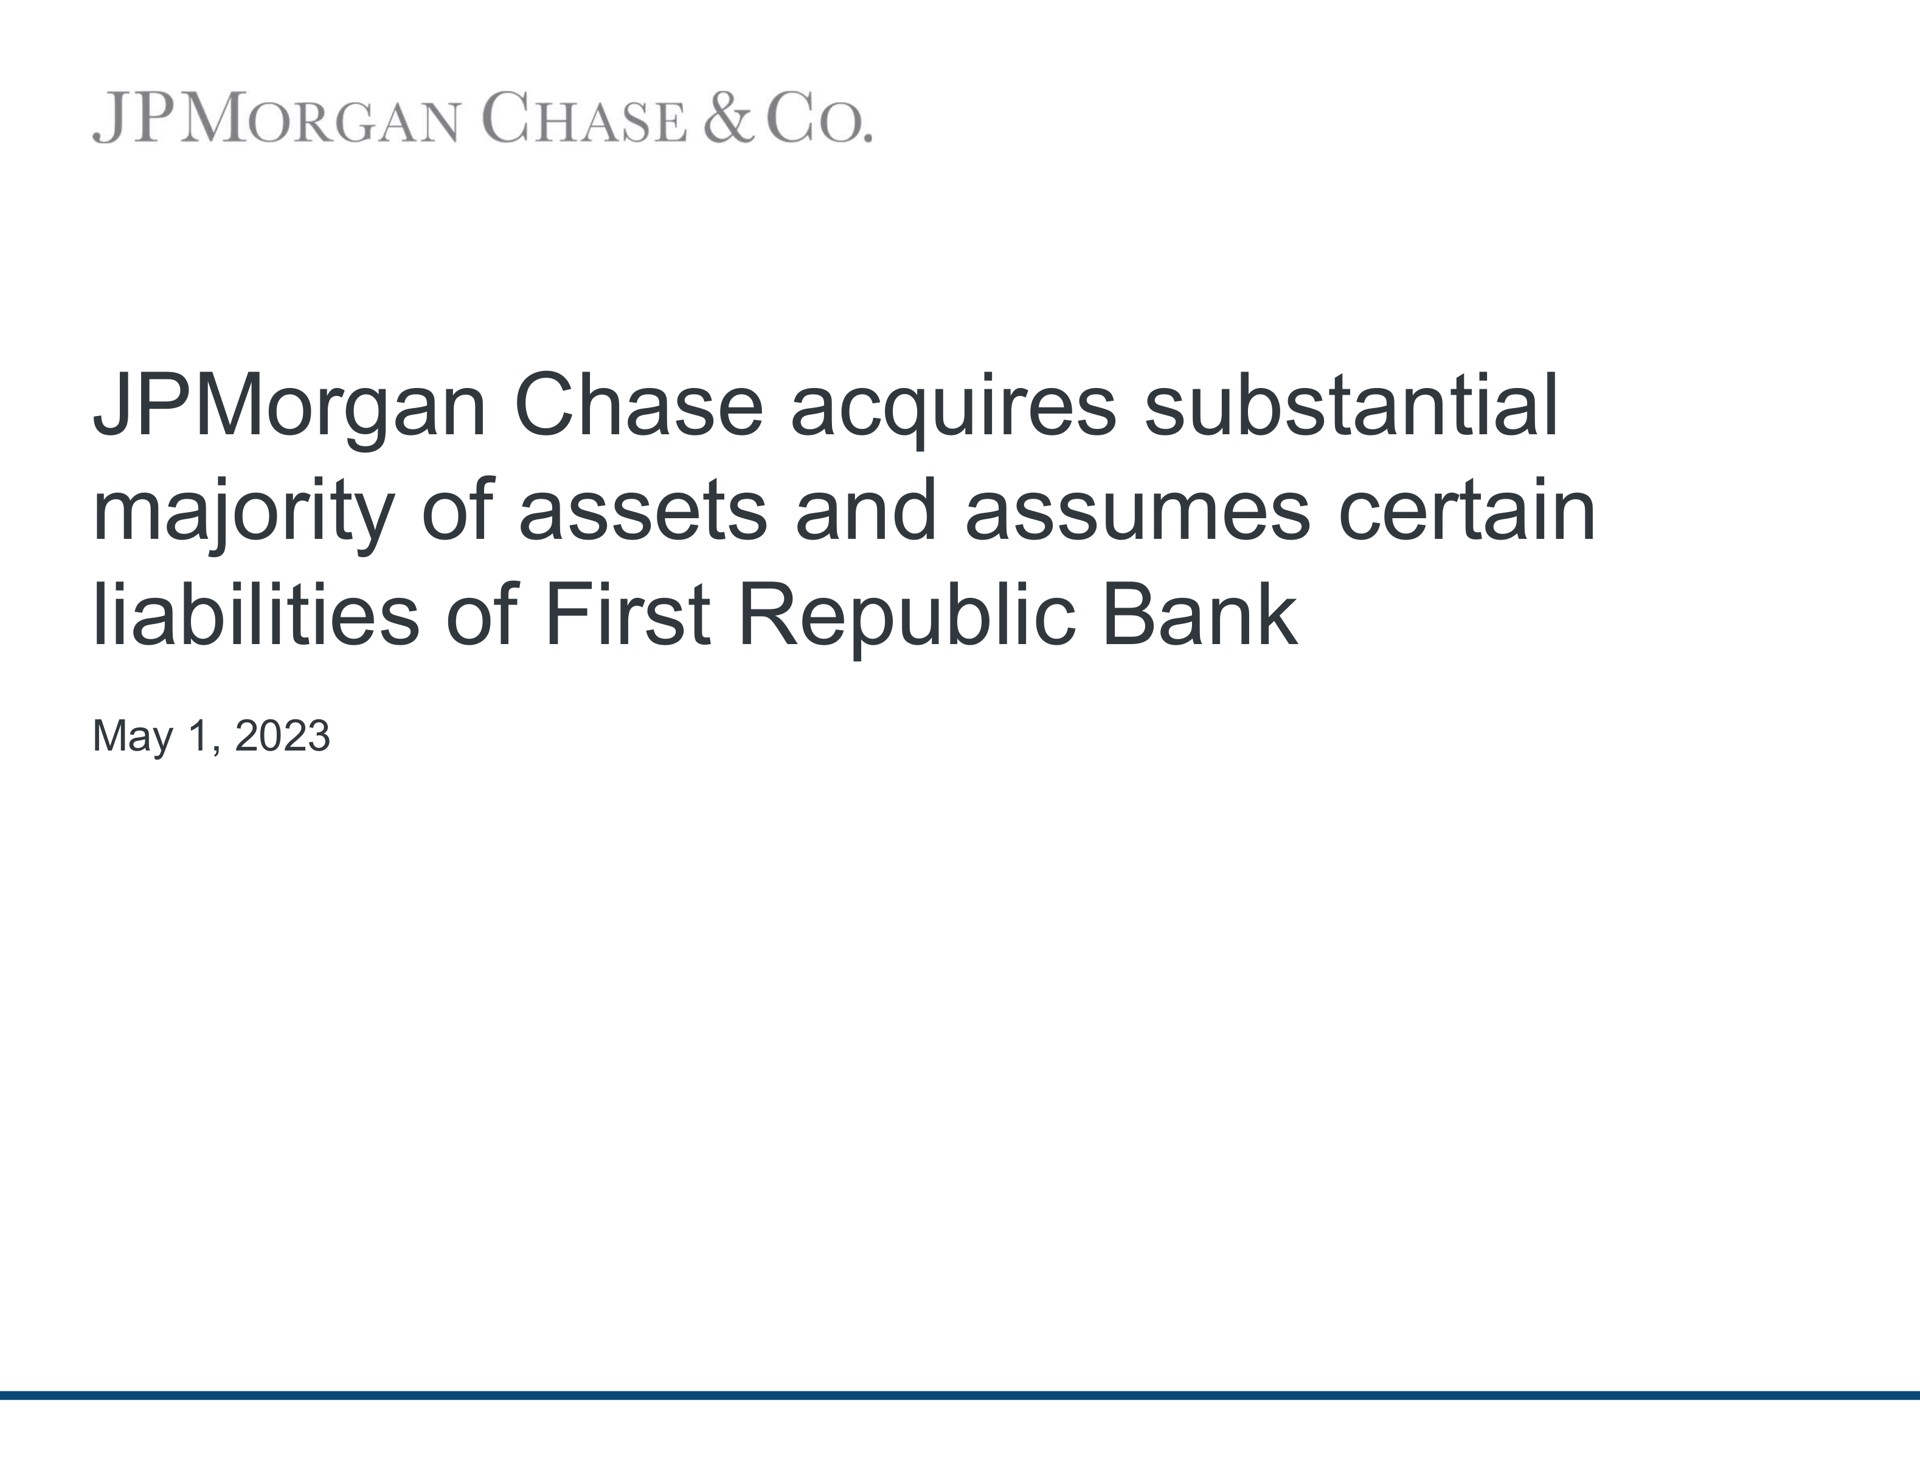 chase acquires substantial majority of assets and assumes certain liabilities of first republic bank may | J.P.Morgan